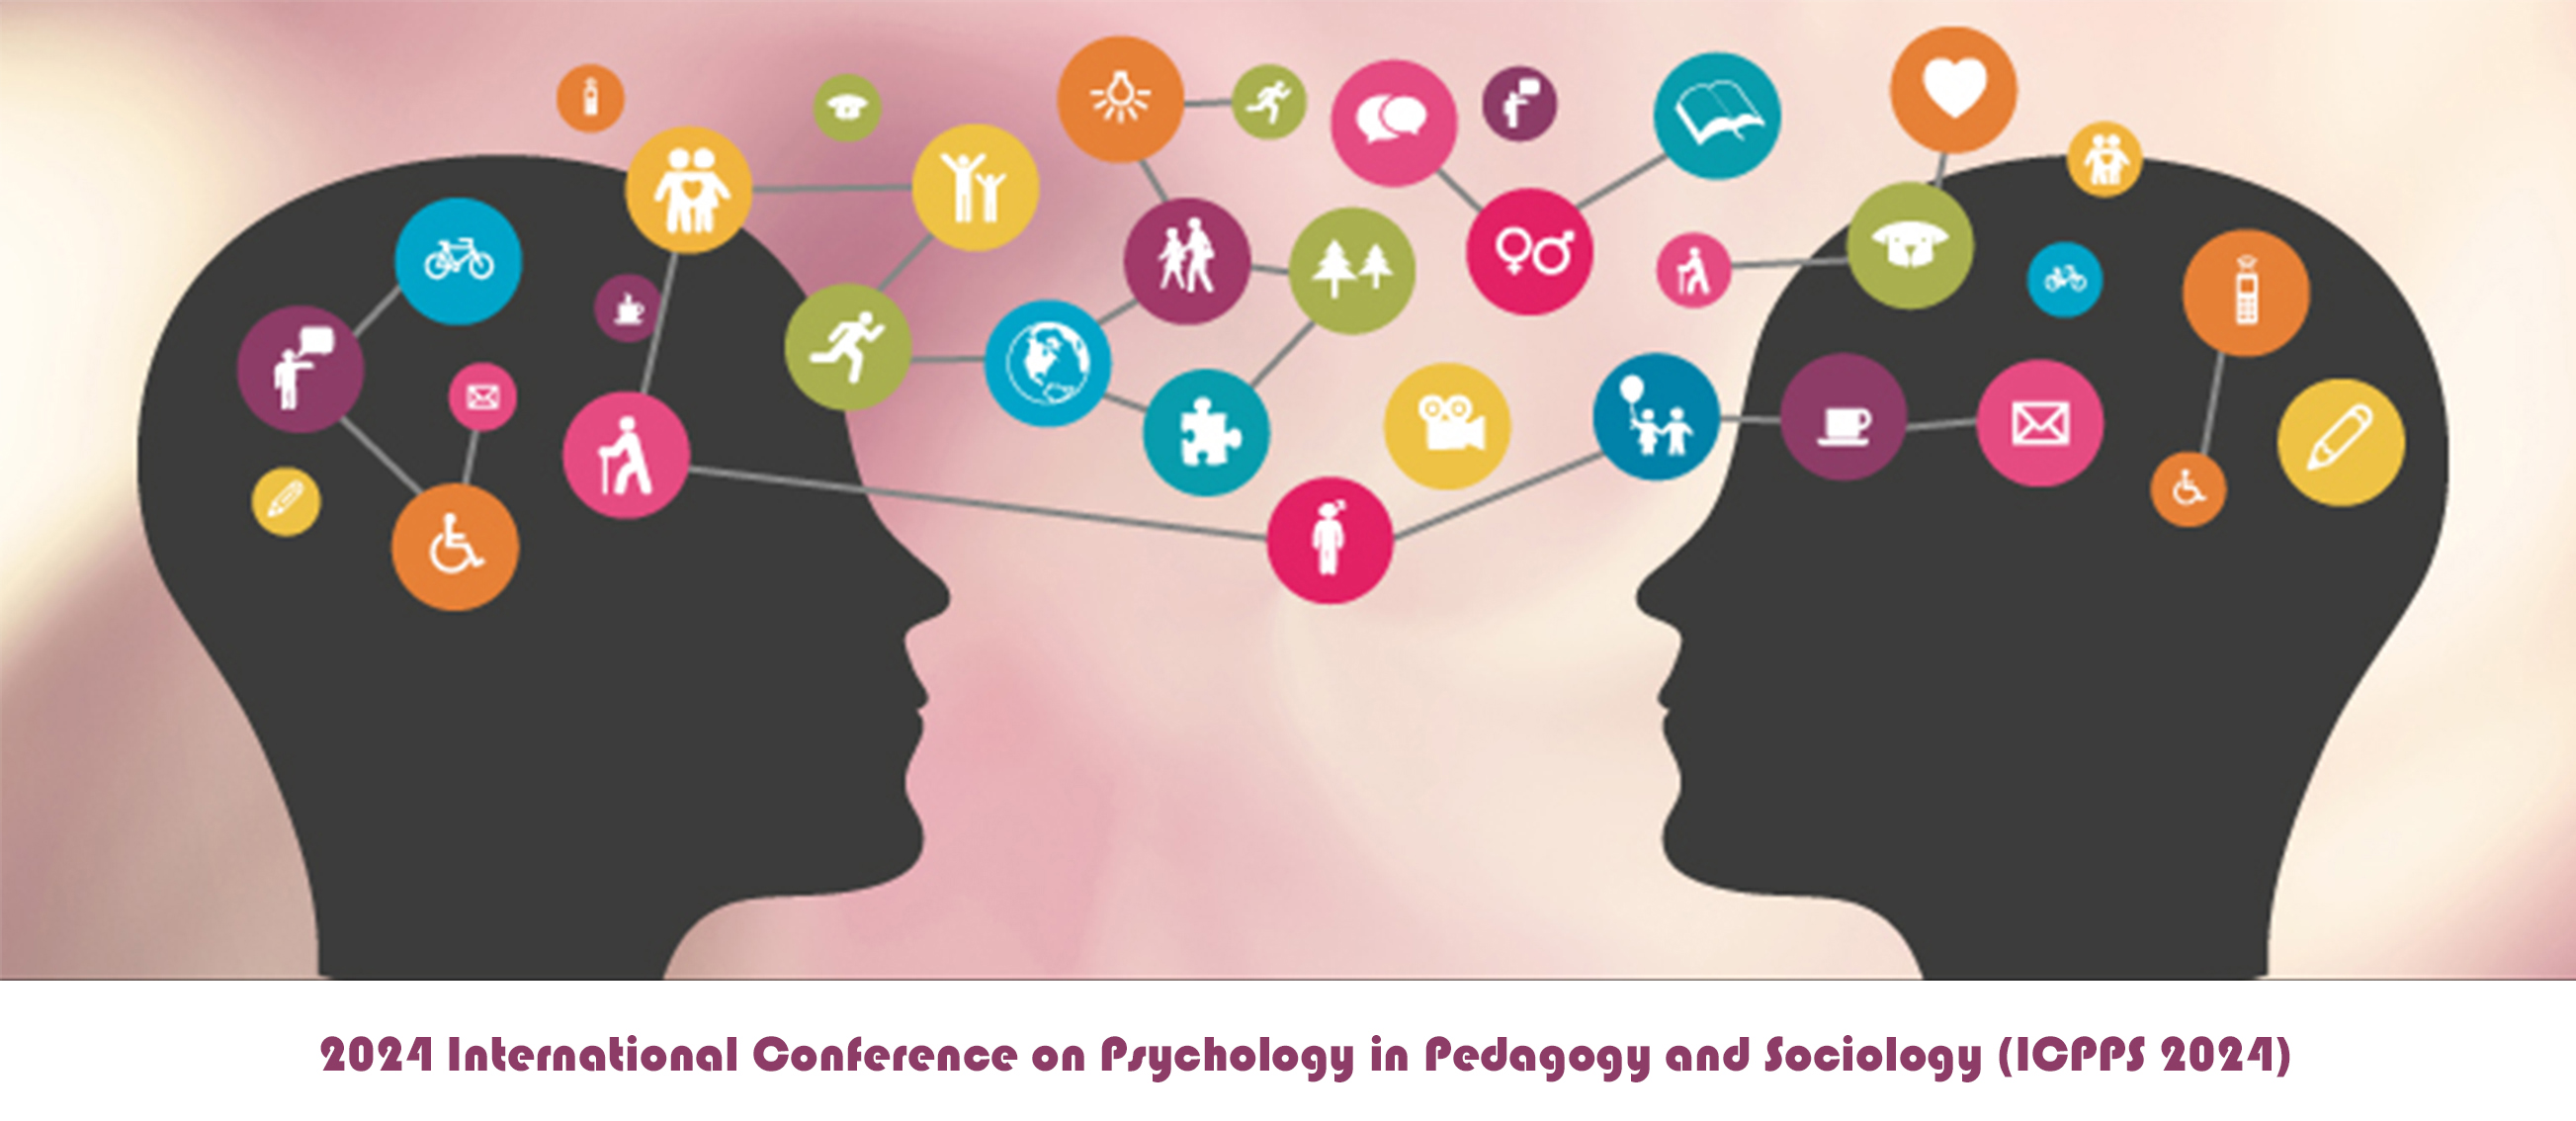 2024 International Conference on Psychology in Pedagogy and Sociology (ICPPS 2024)